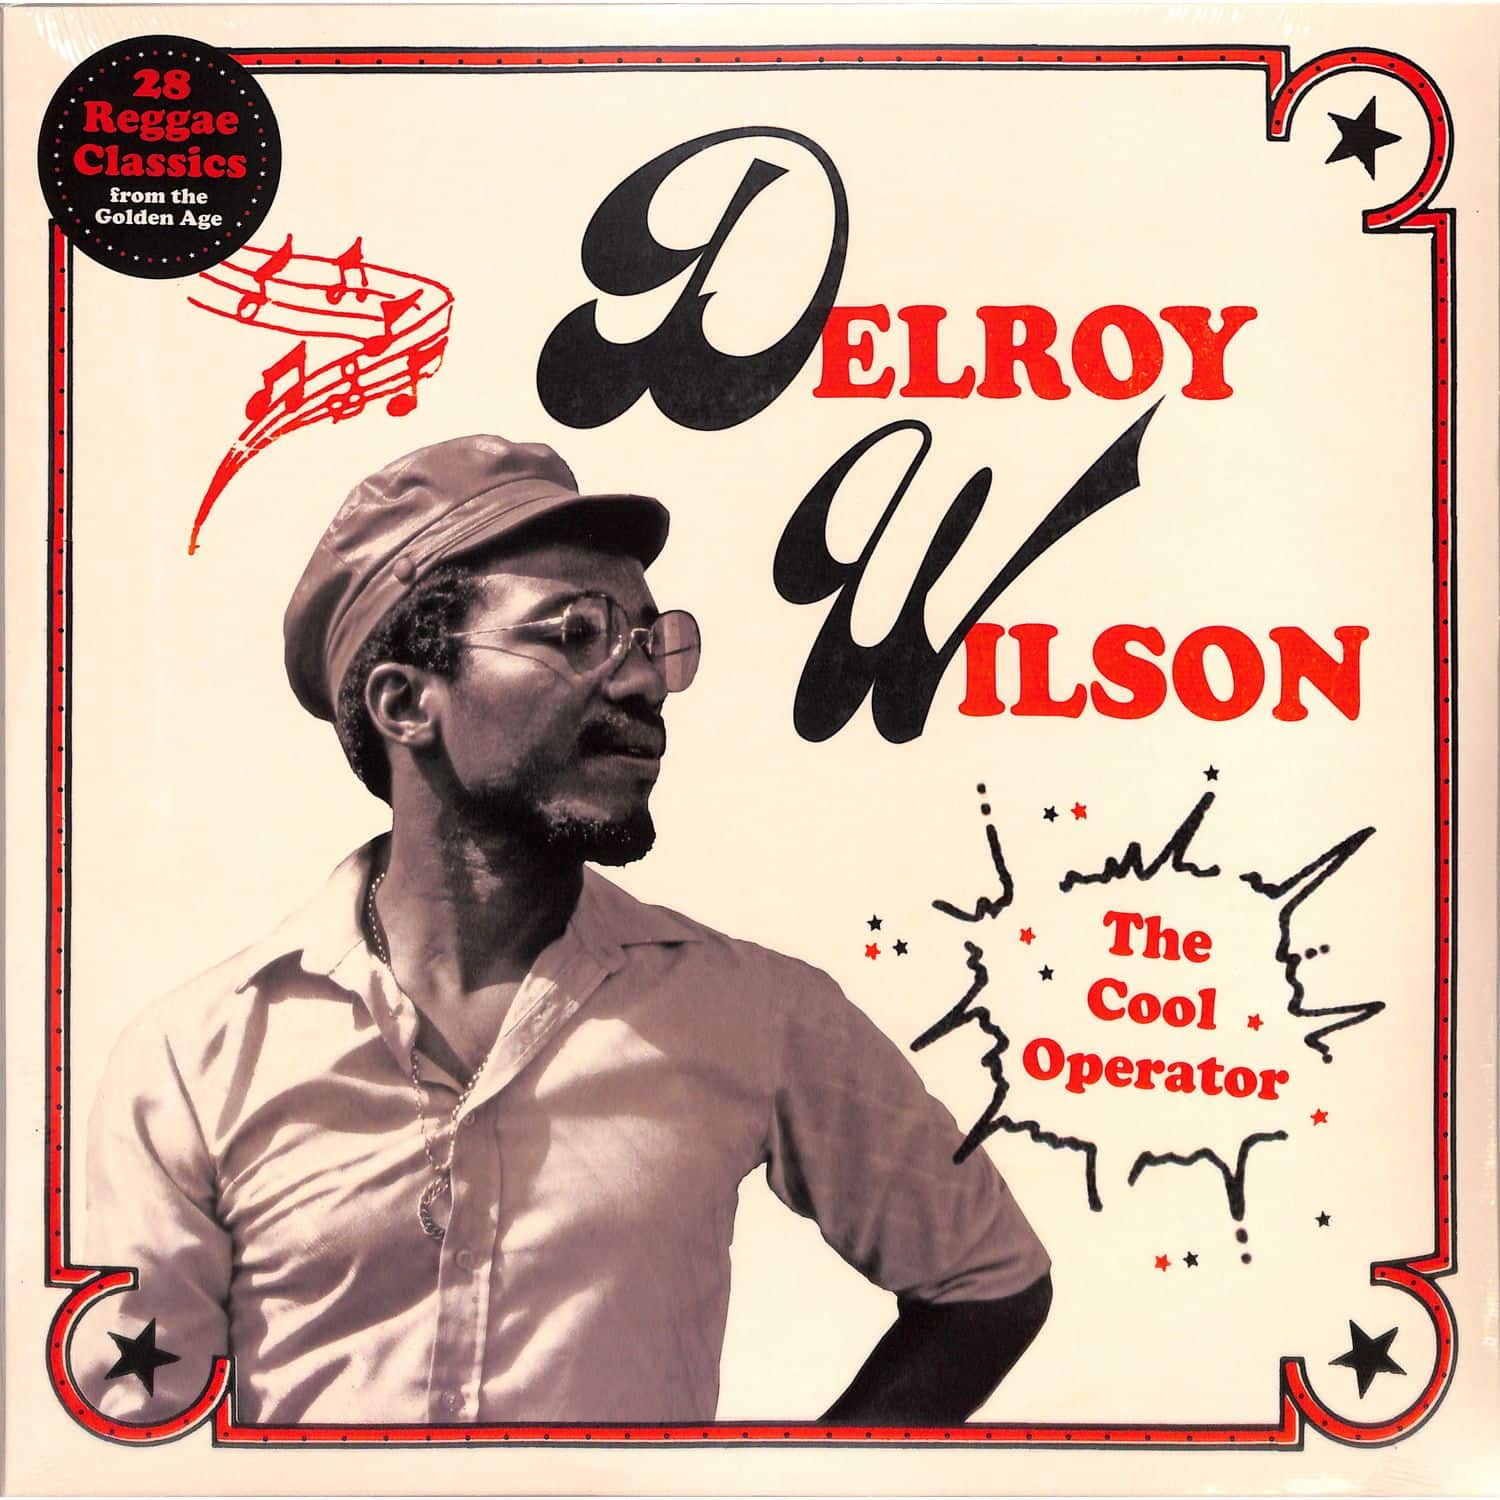 Delroy Wilson - THE COOL OPERATOR 